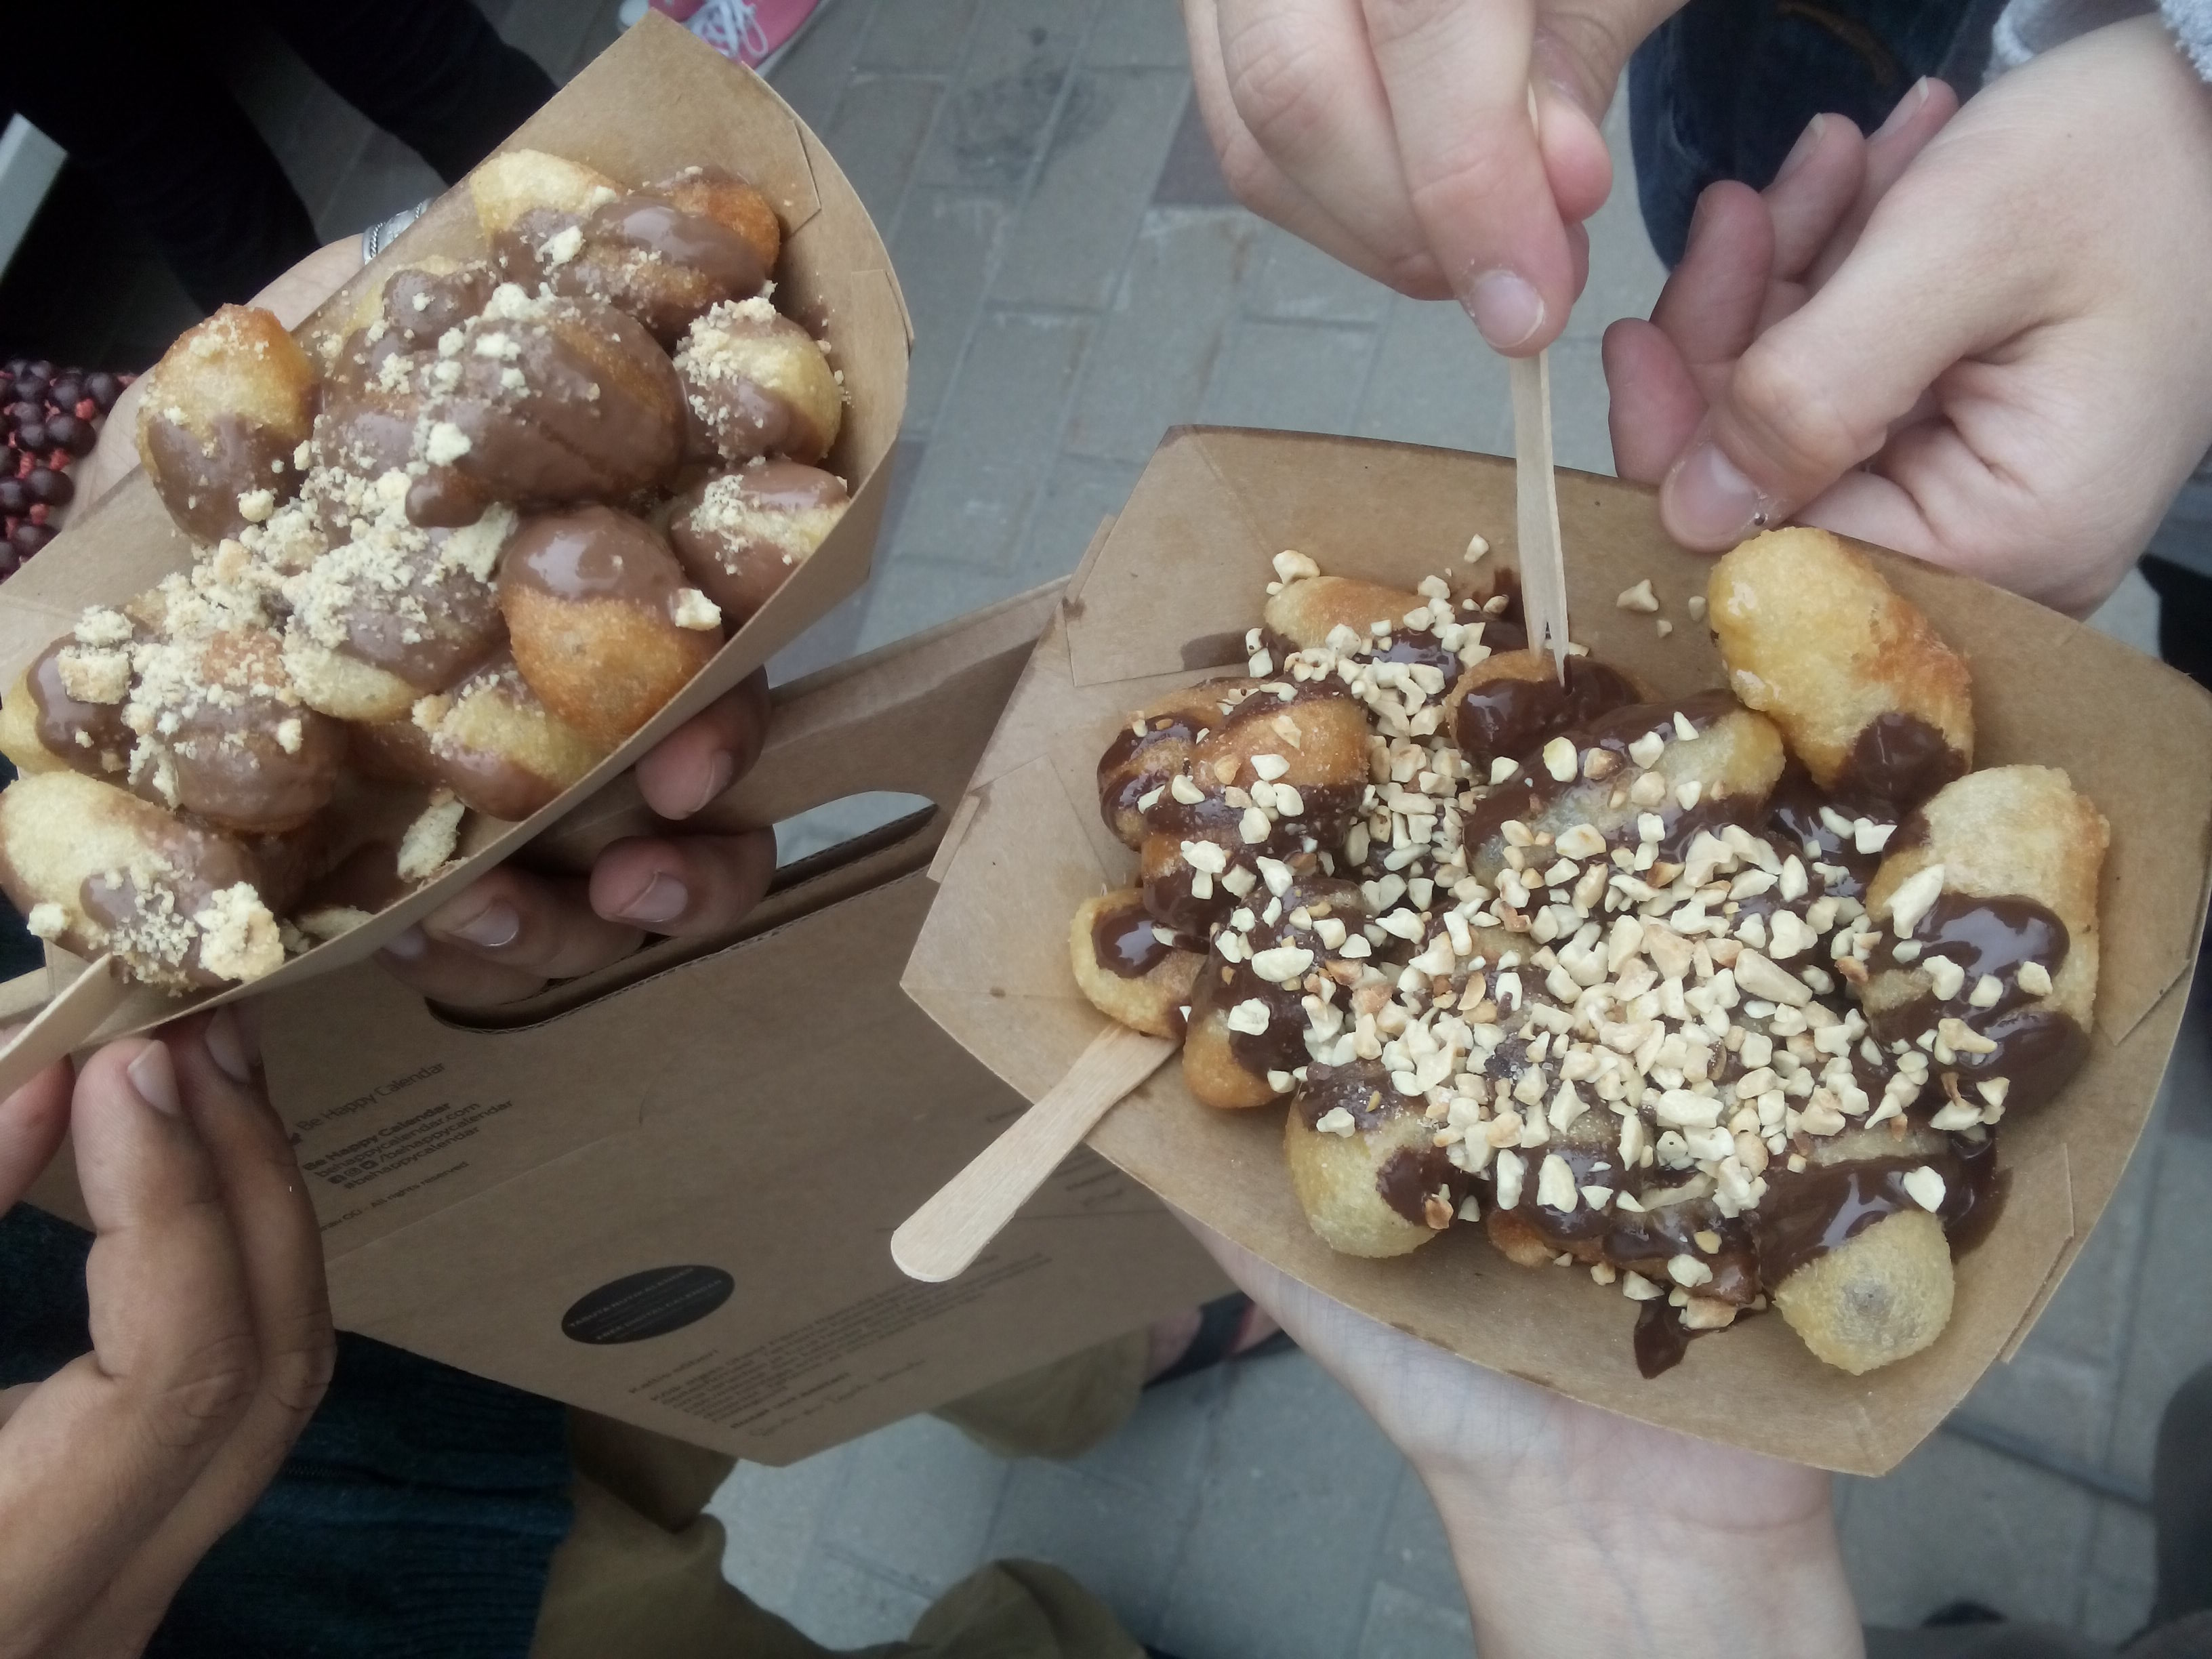 Hands holding two cardboard trays of donut holes covered in chocolate and nuts